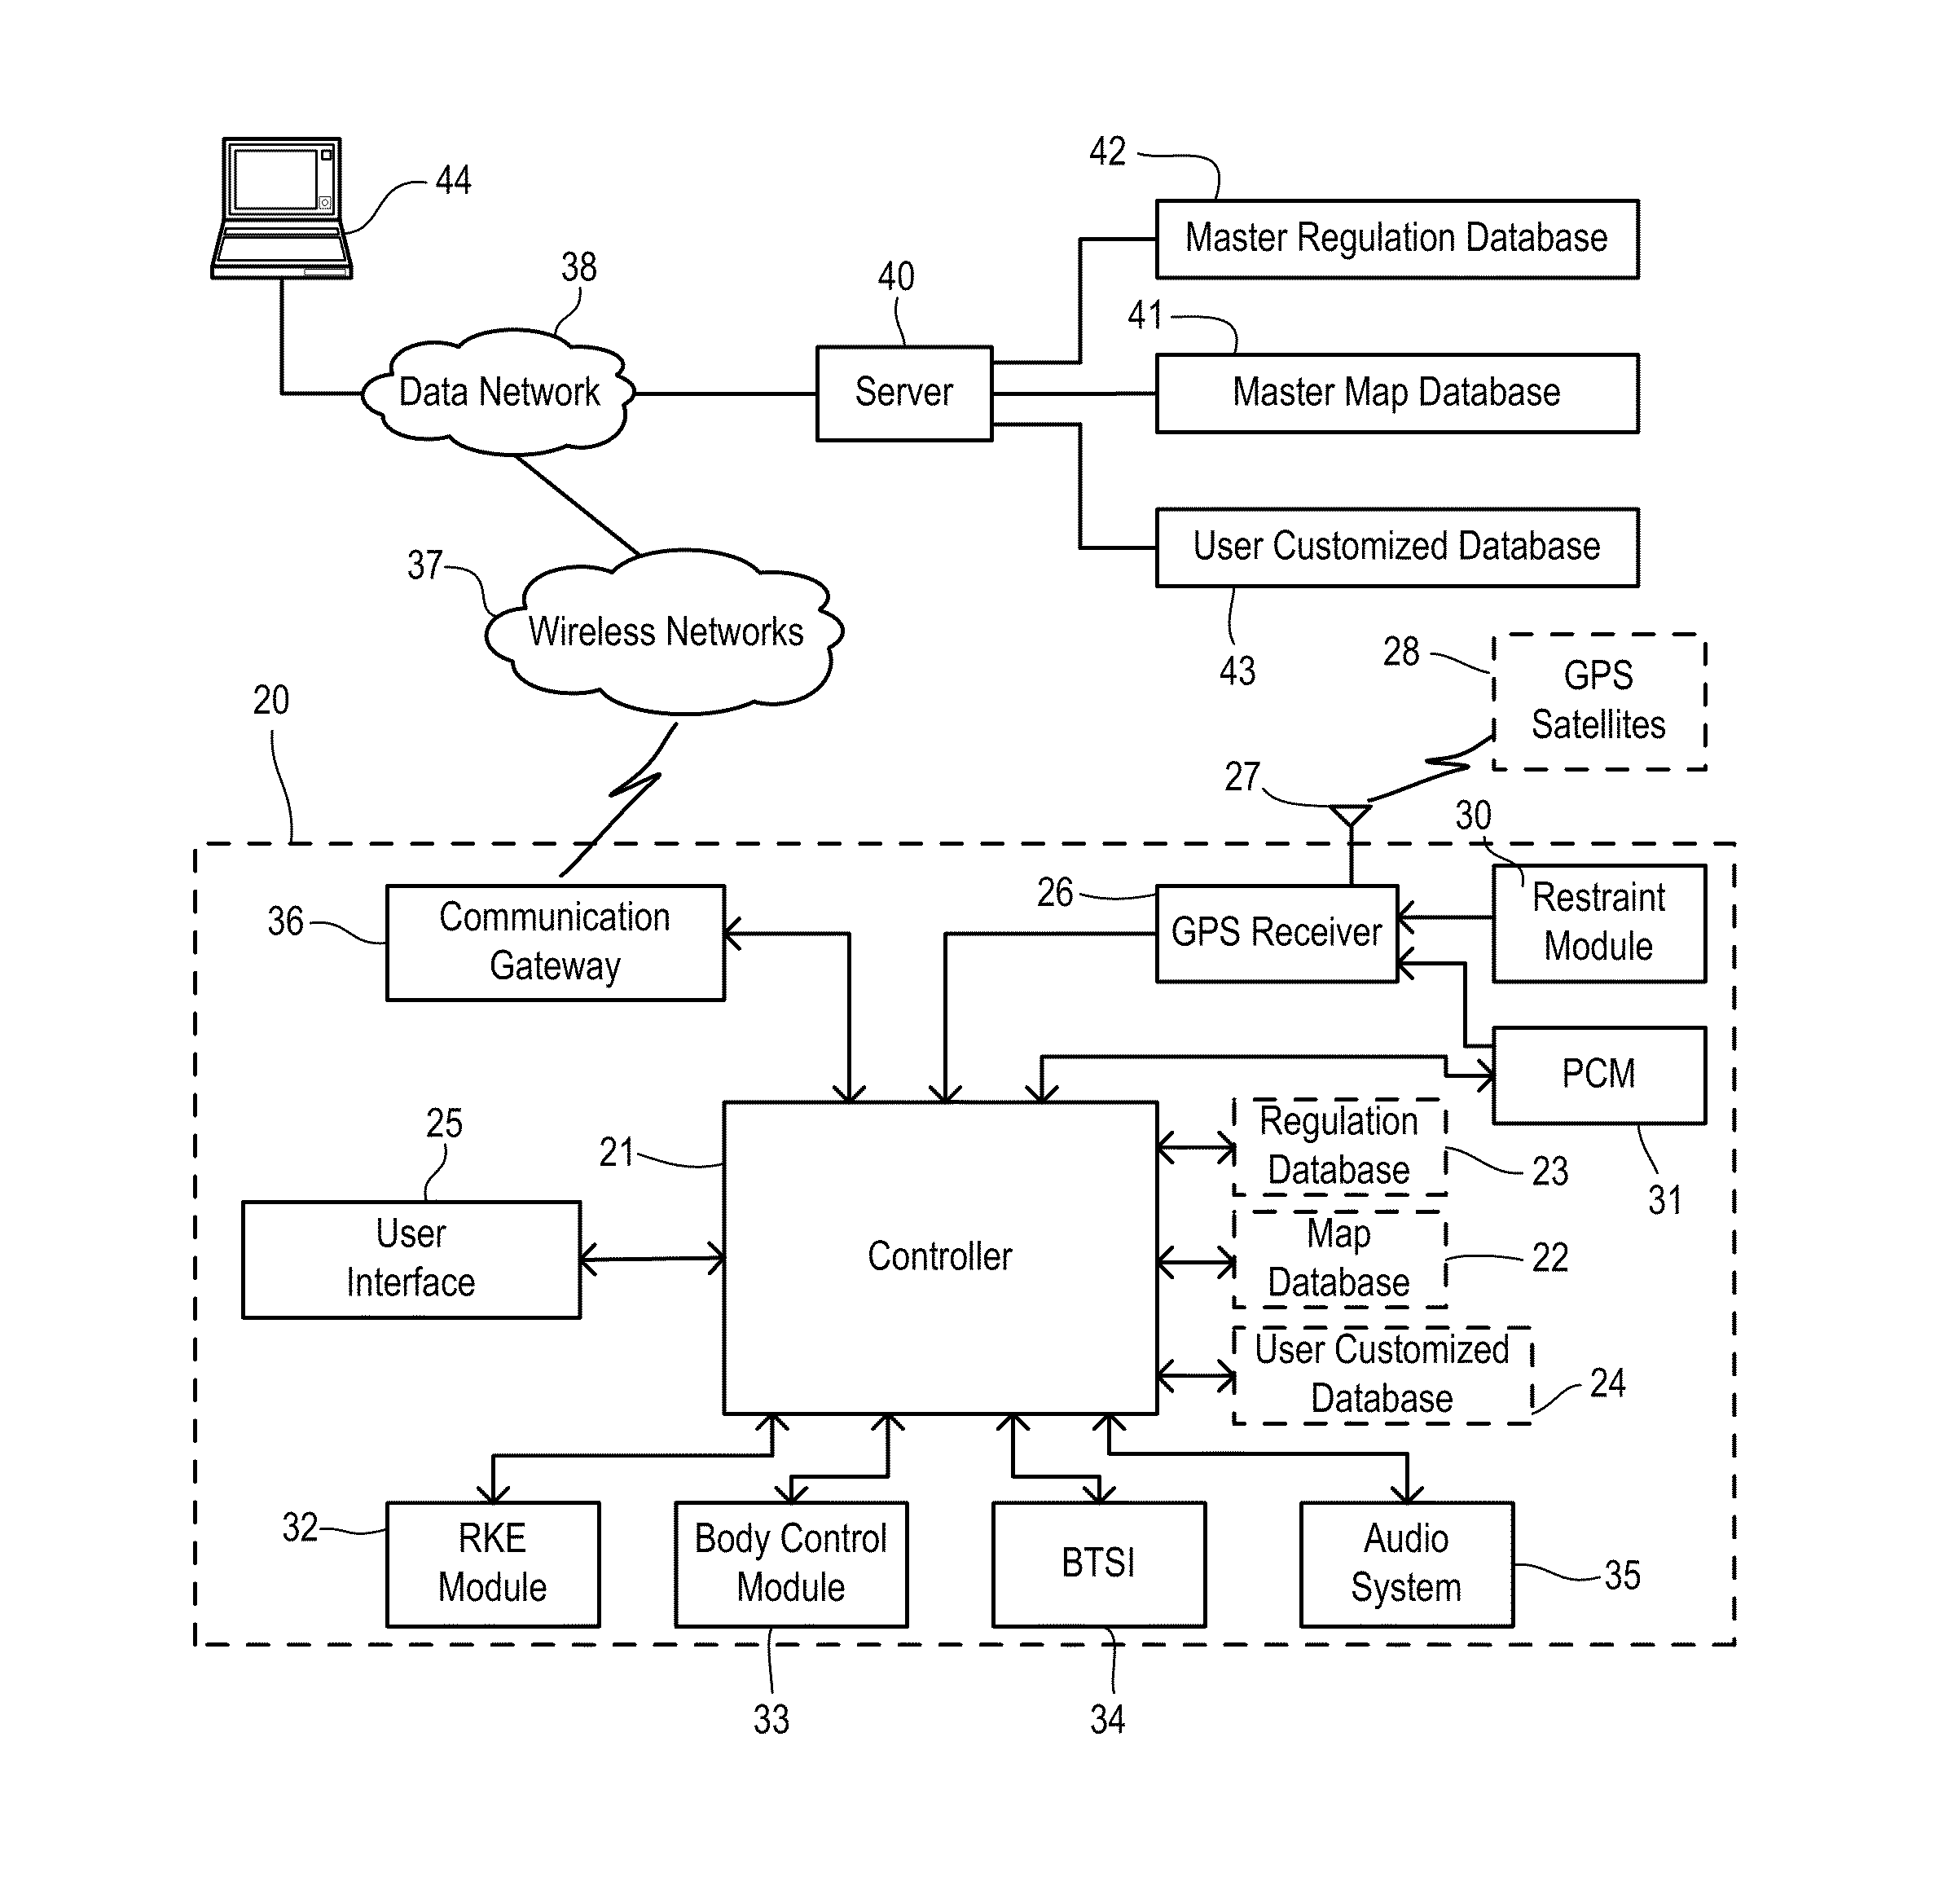 Jurisdiction-aware function control and configuration for motor vehicles